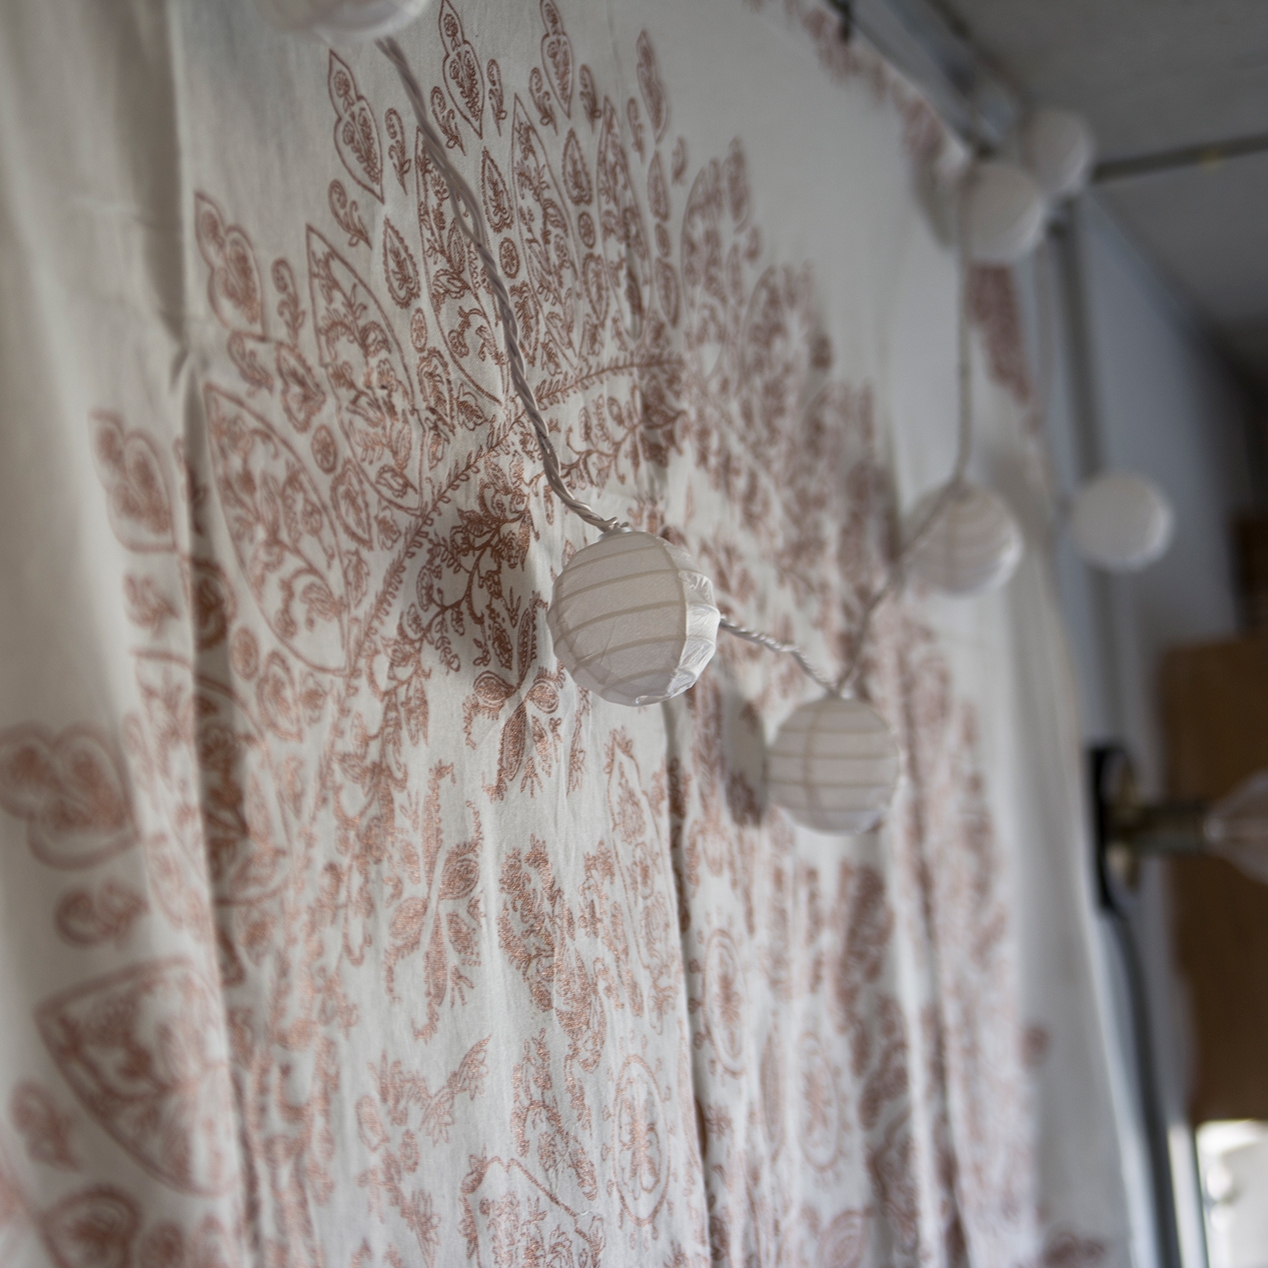 We used tapestries and warm lighting to celebrate Bailey’s “boho-chic” style.